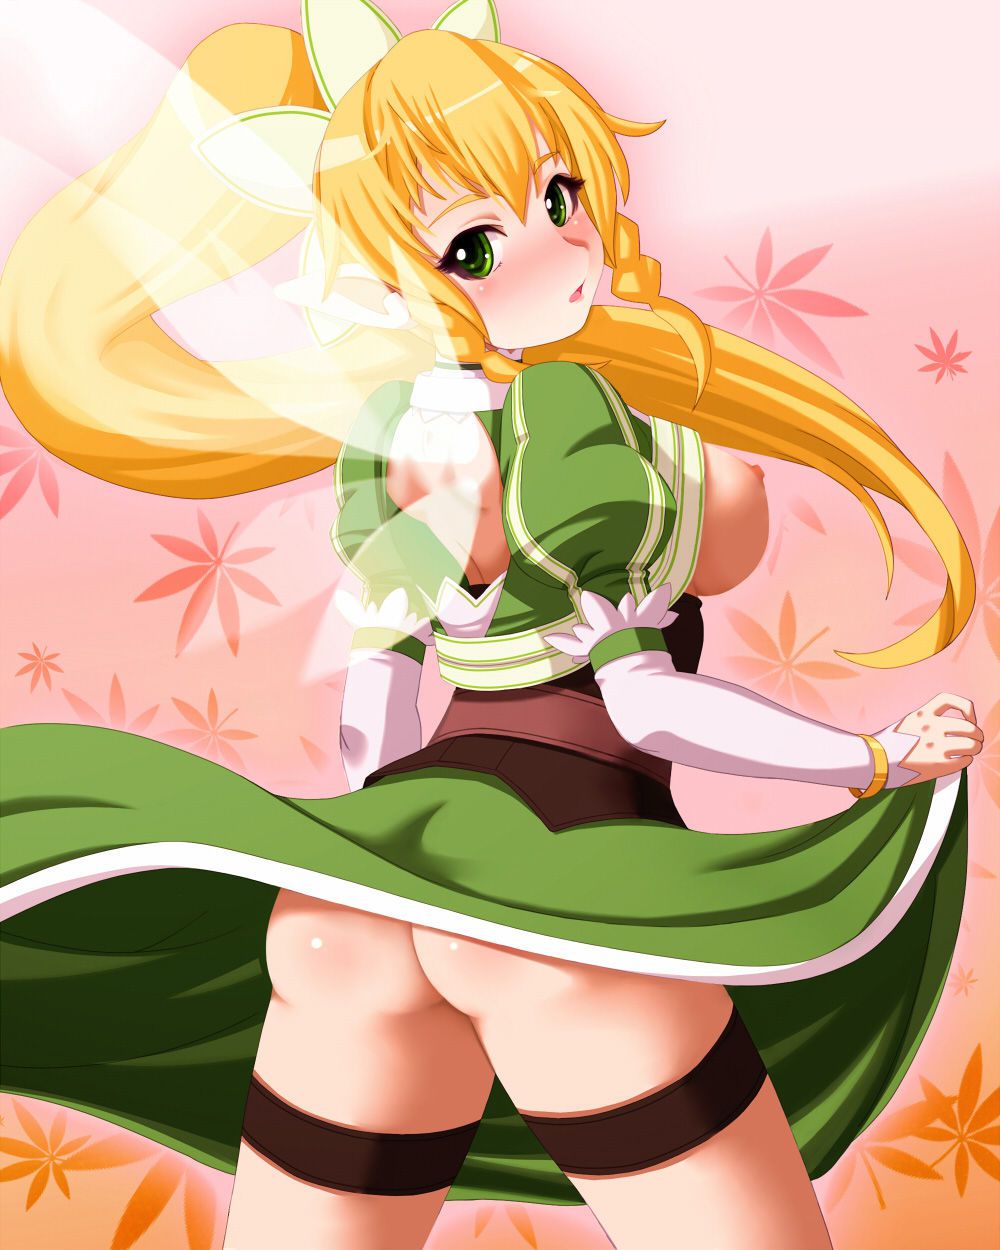 Leafa's Marshmallow big tits and boobs tits online lick with how ww. Sheets挟ndara Dick only worn in disagreeable leafa so cum and I tits together... sword online 29